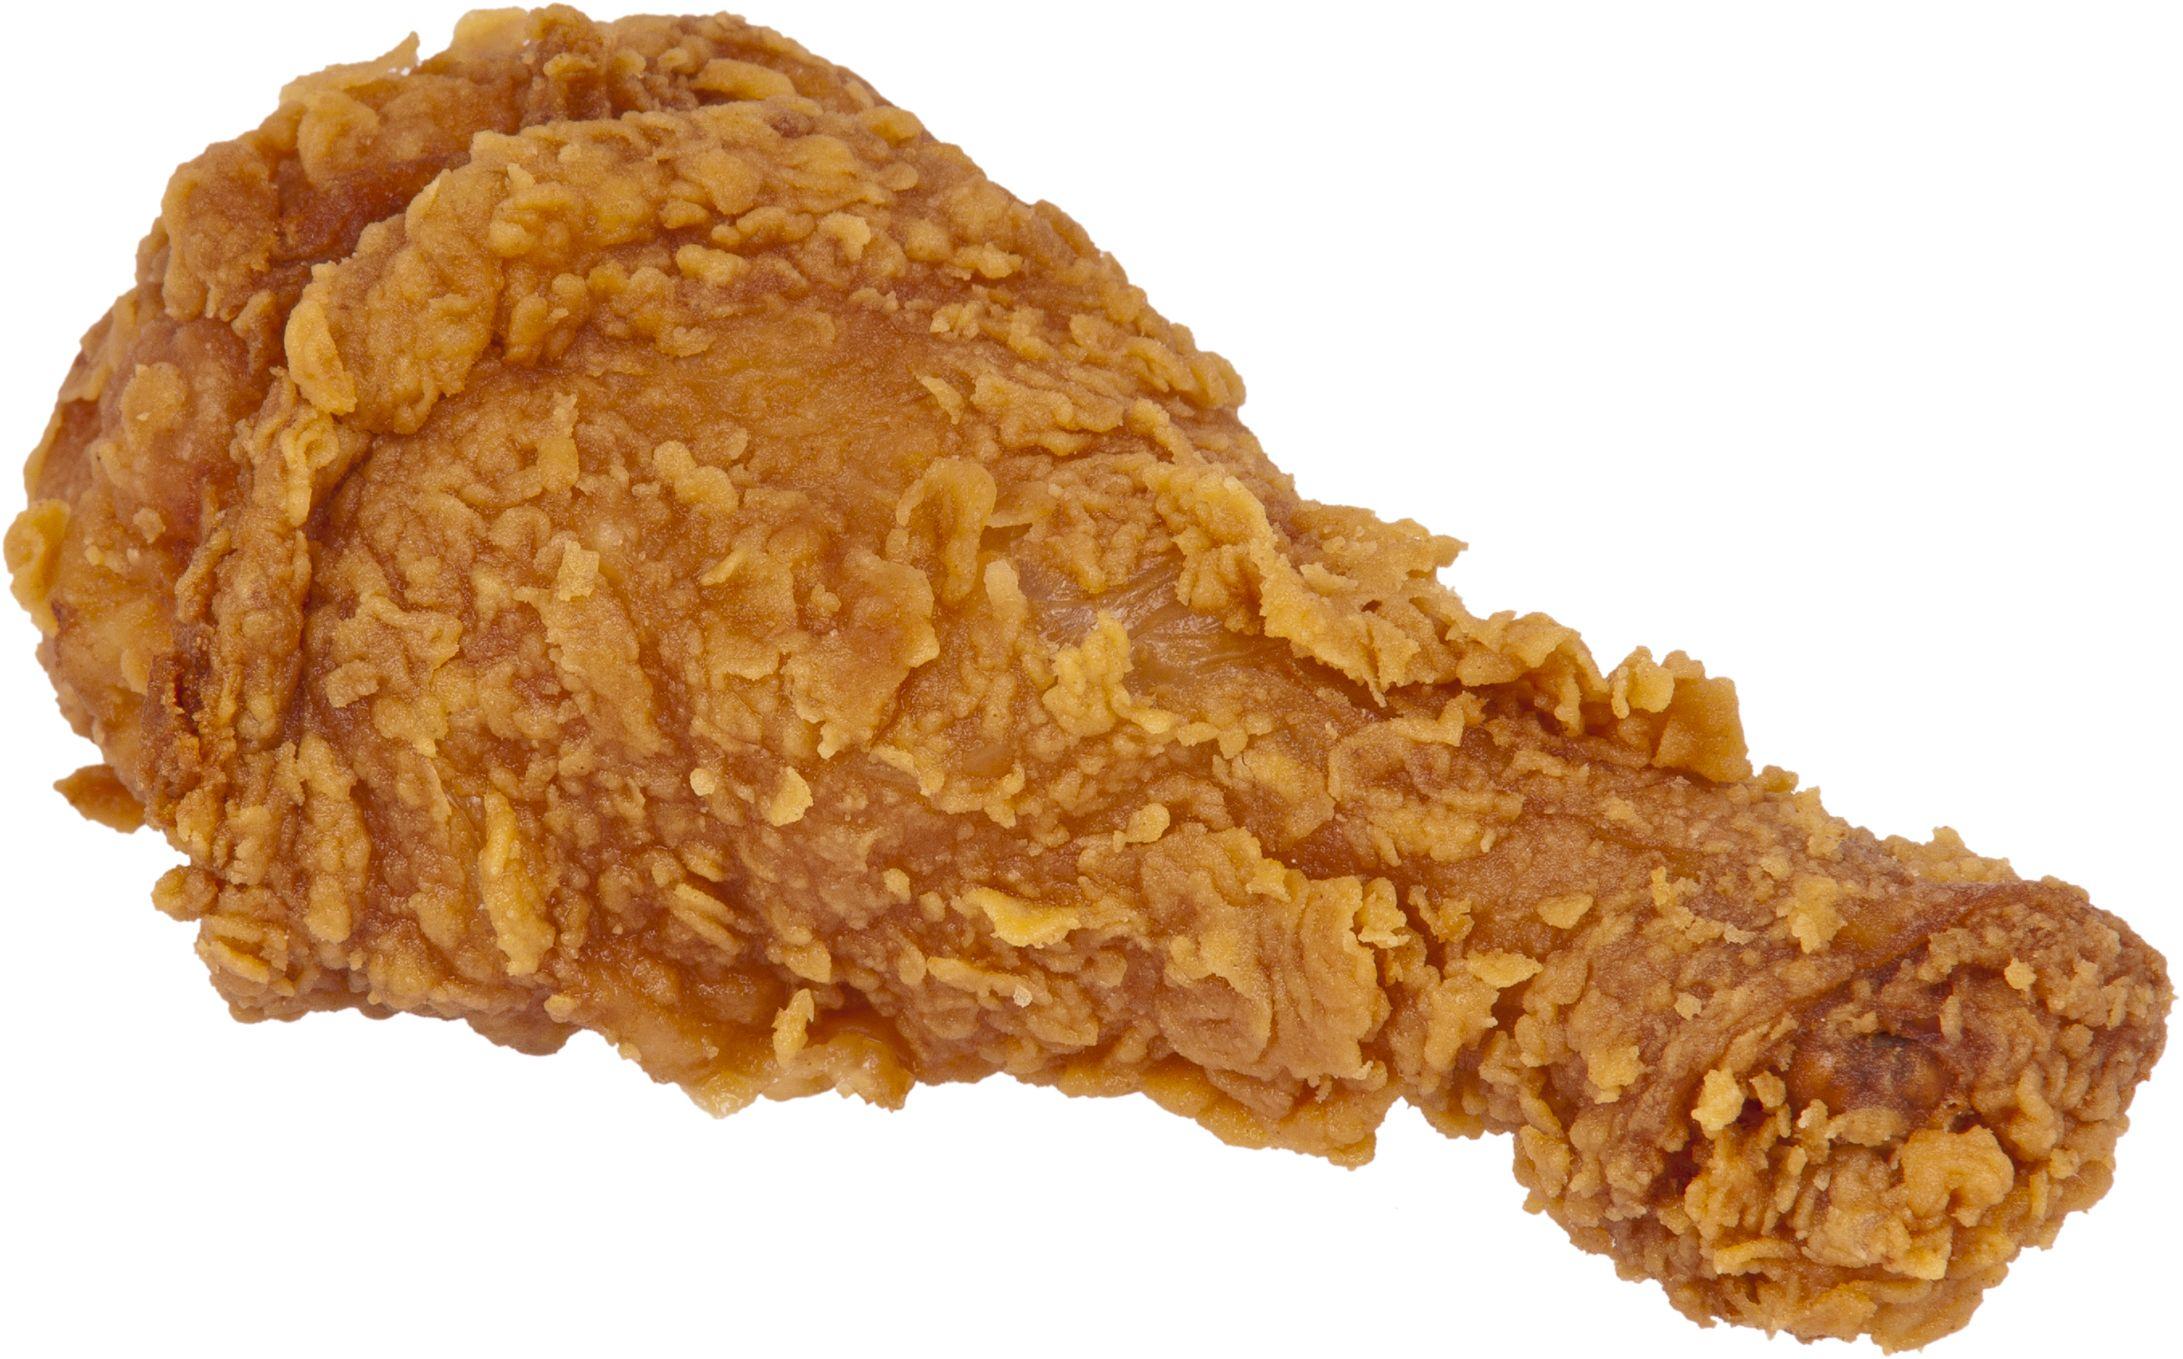 Fried Chicken Wallpaper Image Photo Picture Background